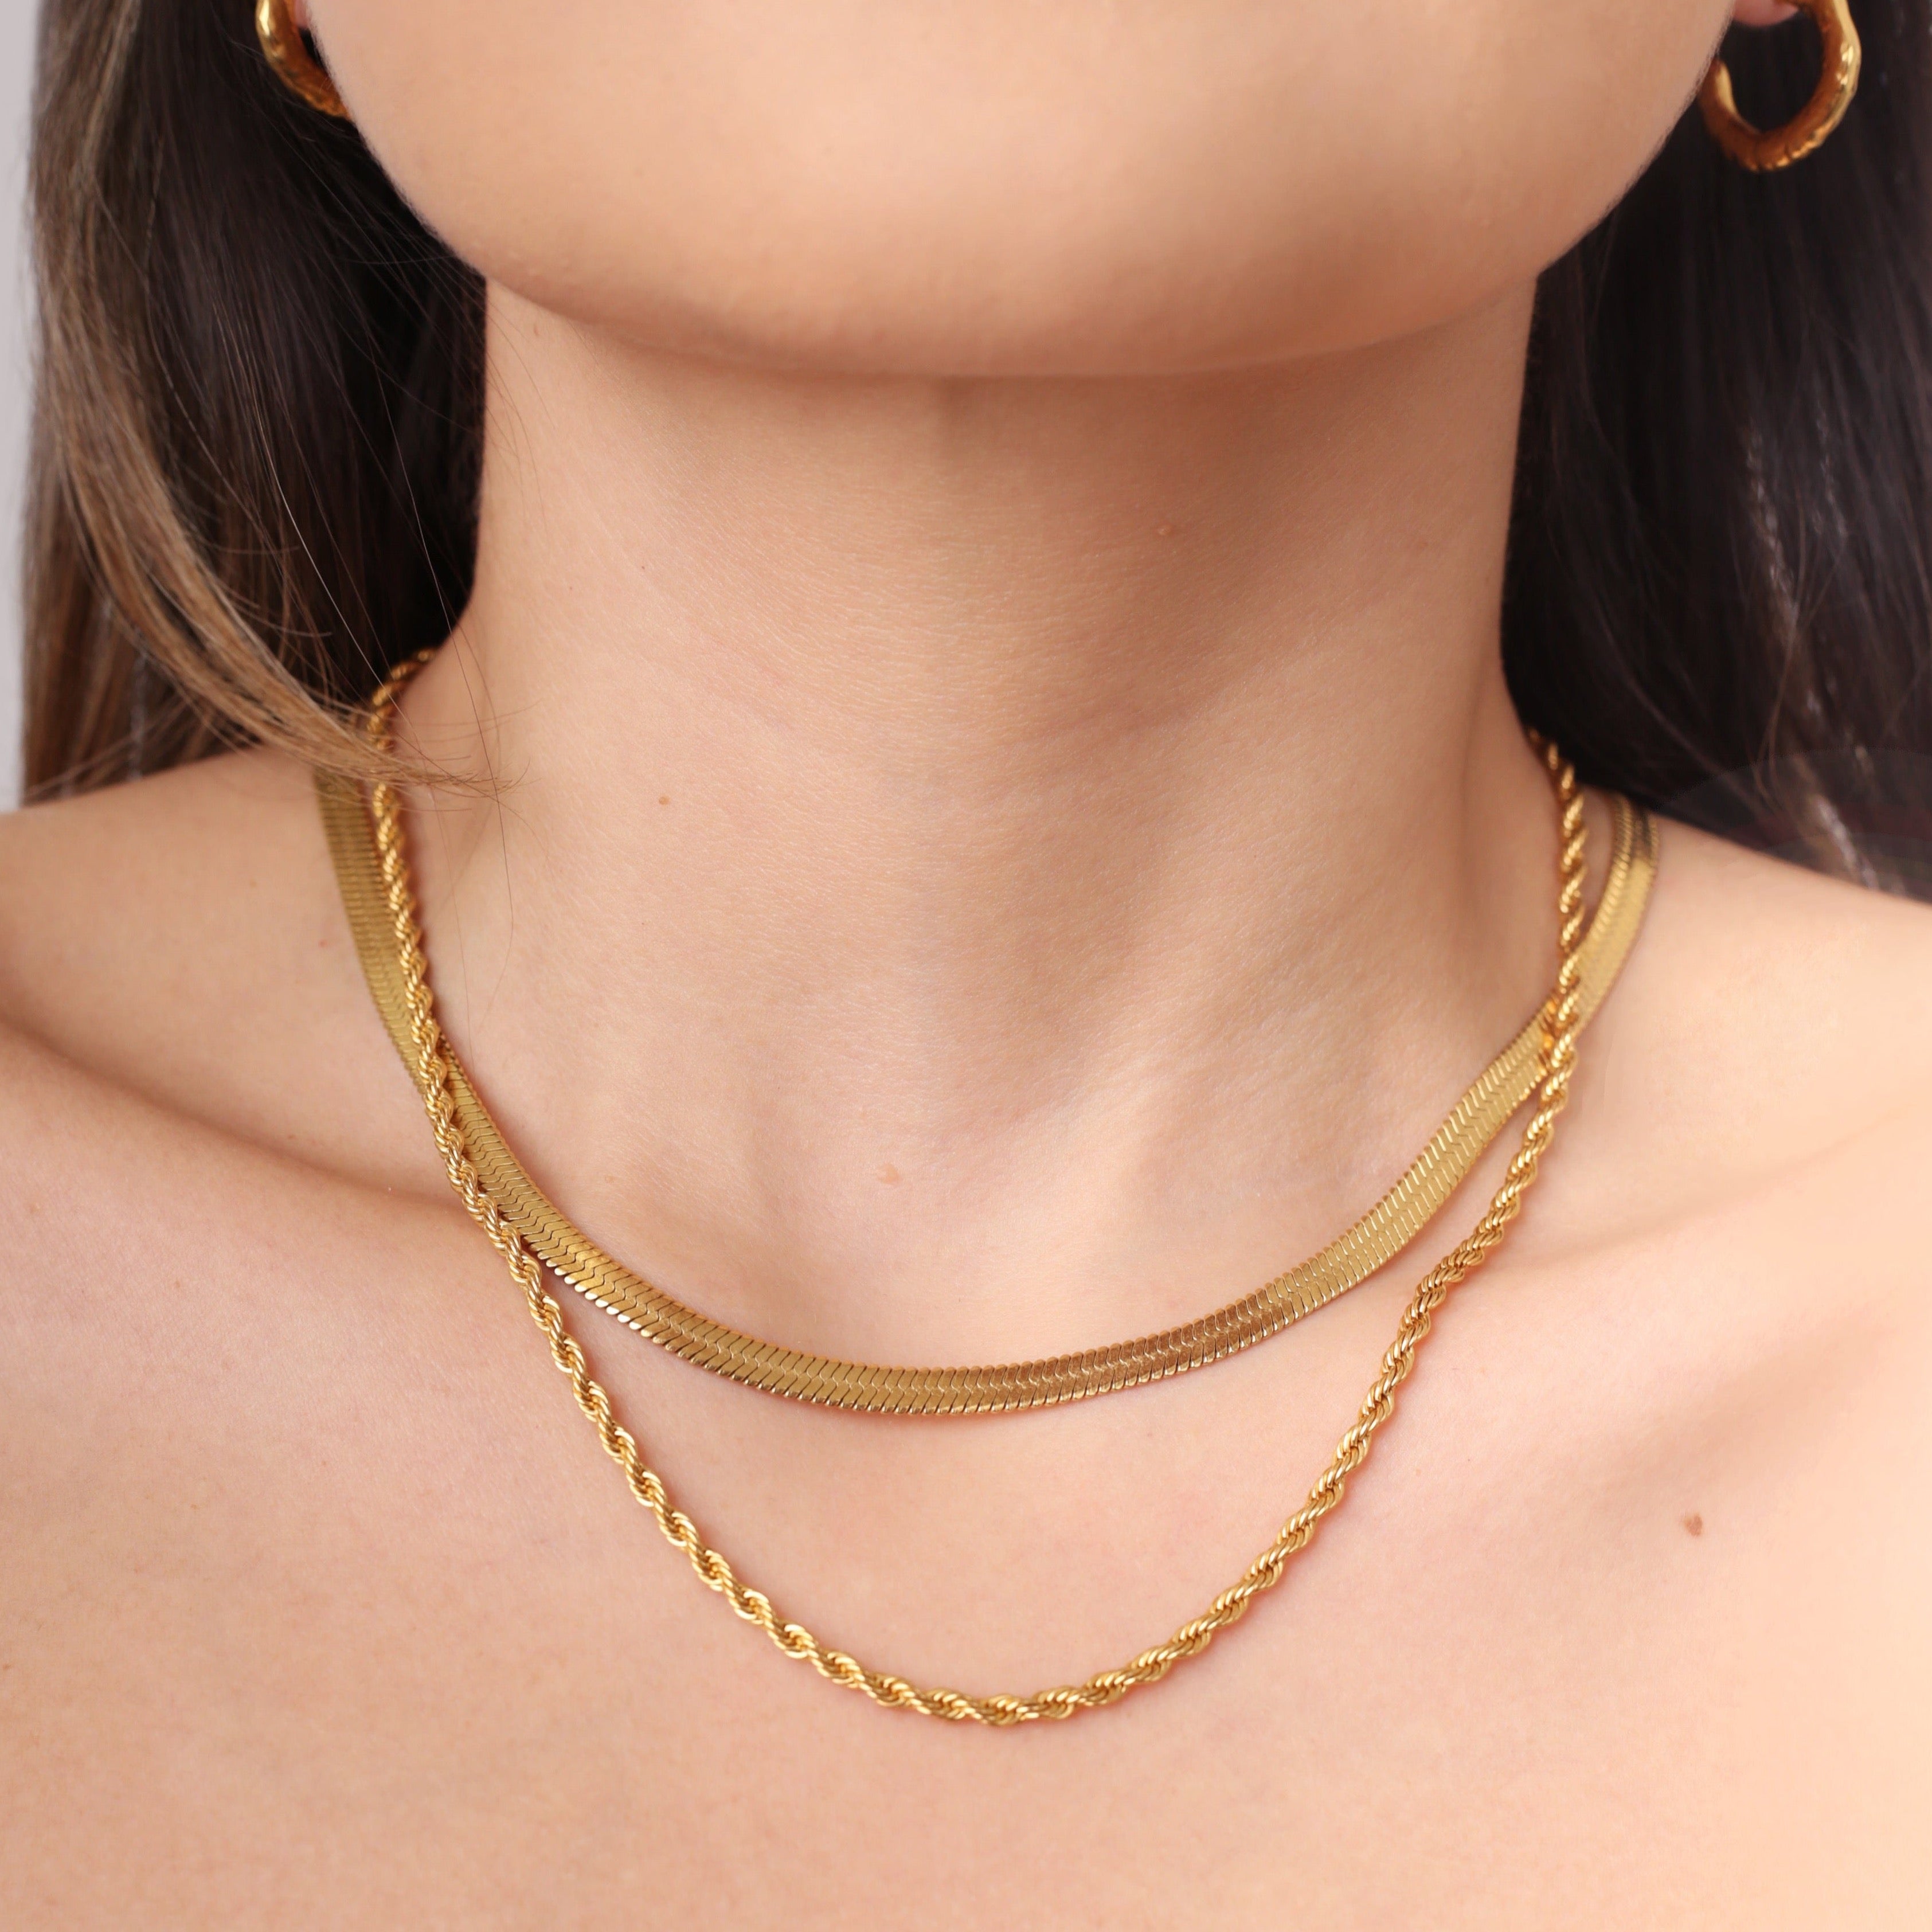 Buy Gold Plated Herringbone Chain Online In India - Etsy India